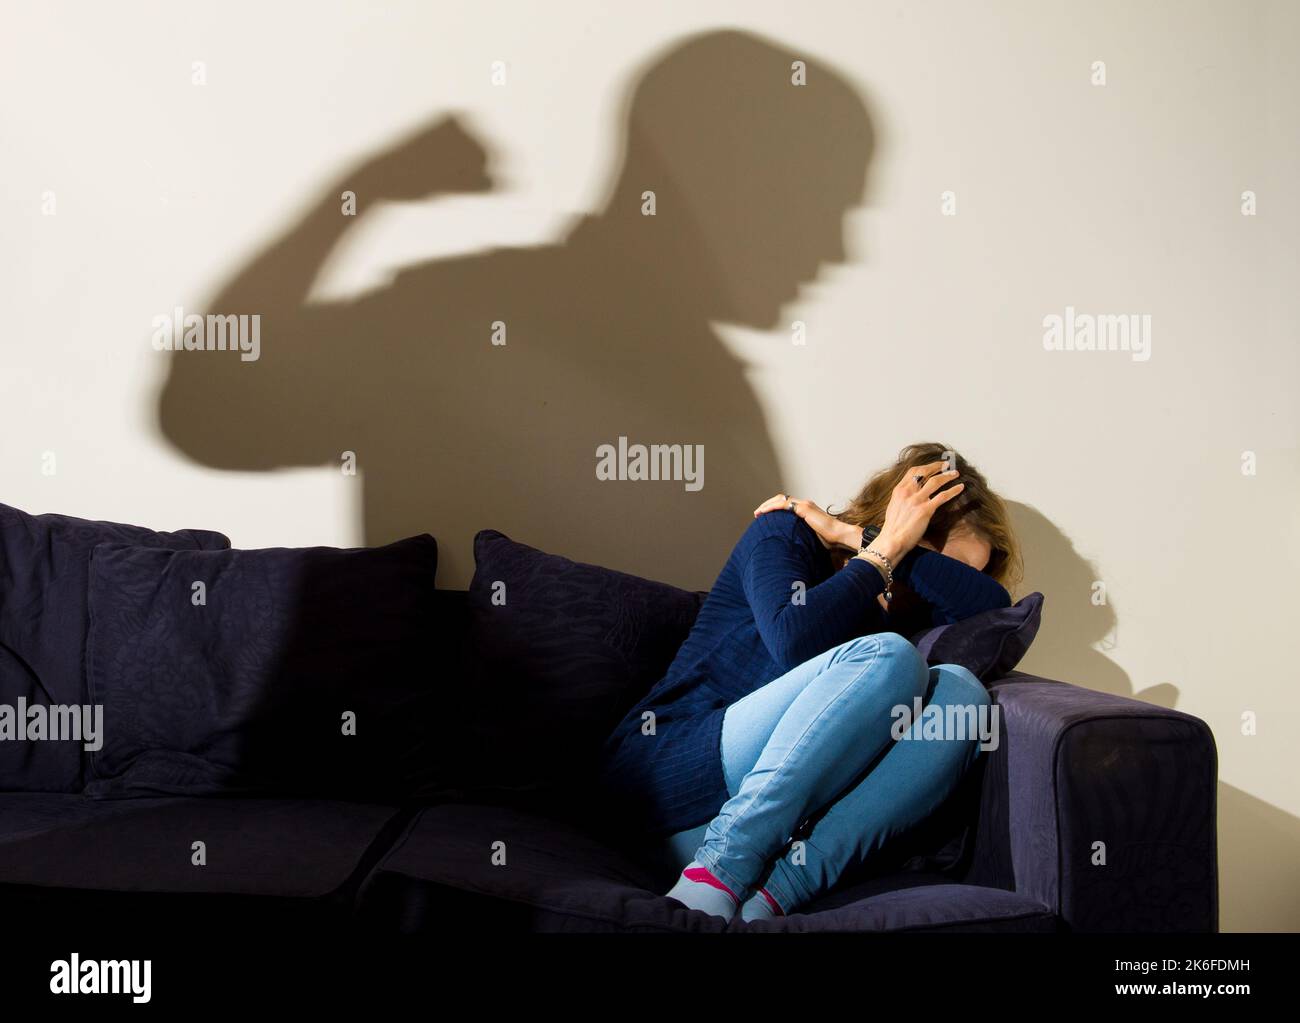 PICTURE POSED BY MODEL File photo dated 09/03/15 of a shadow of a man with a clenched fist as a woman cowers, as a fund for survivors of violence against women and girls has helped nearly 20,000 people in its first six months, the Scottish Government has said. Stock Photo